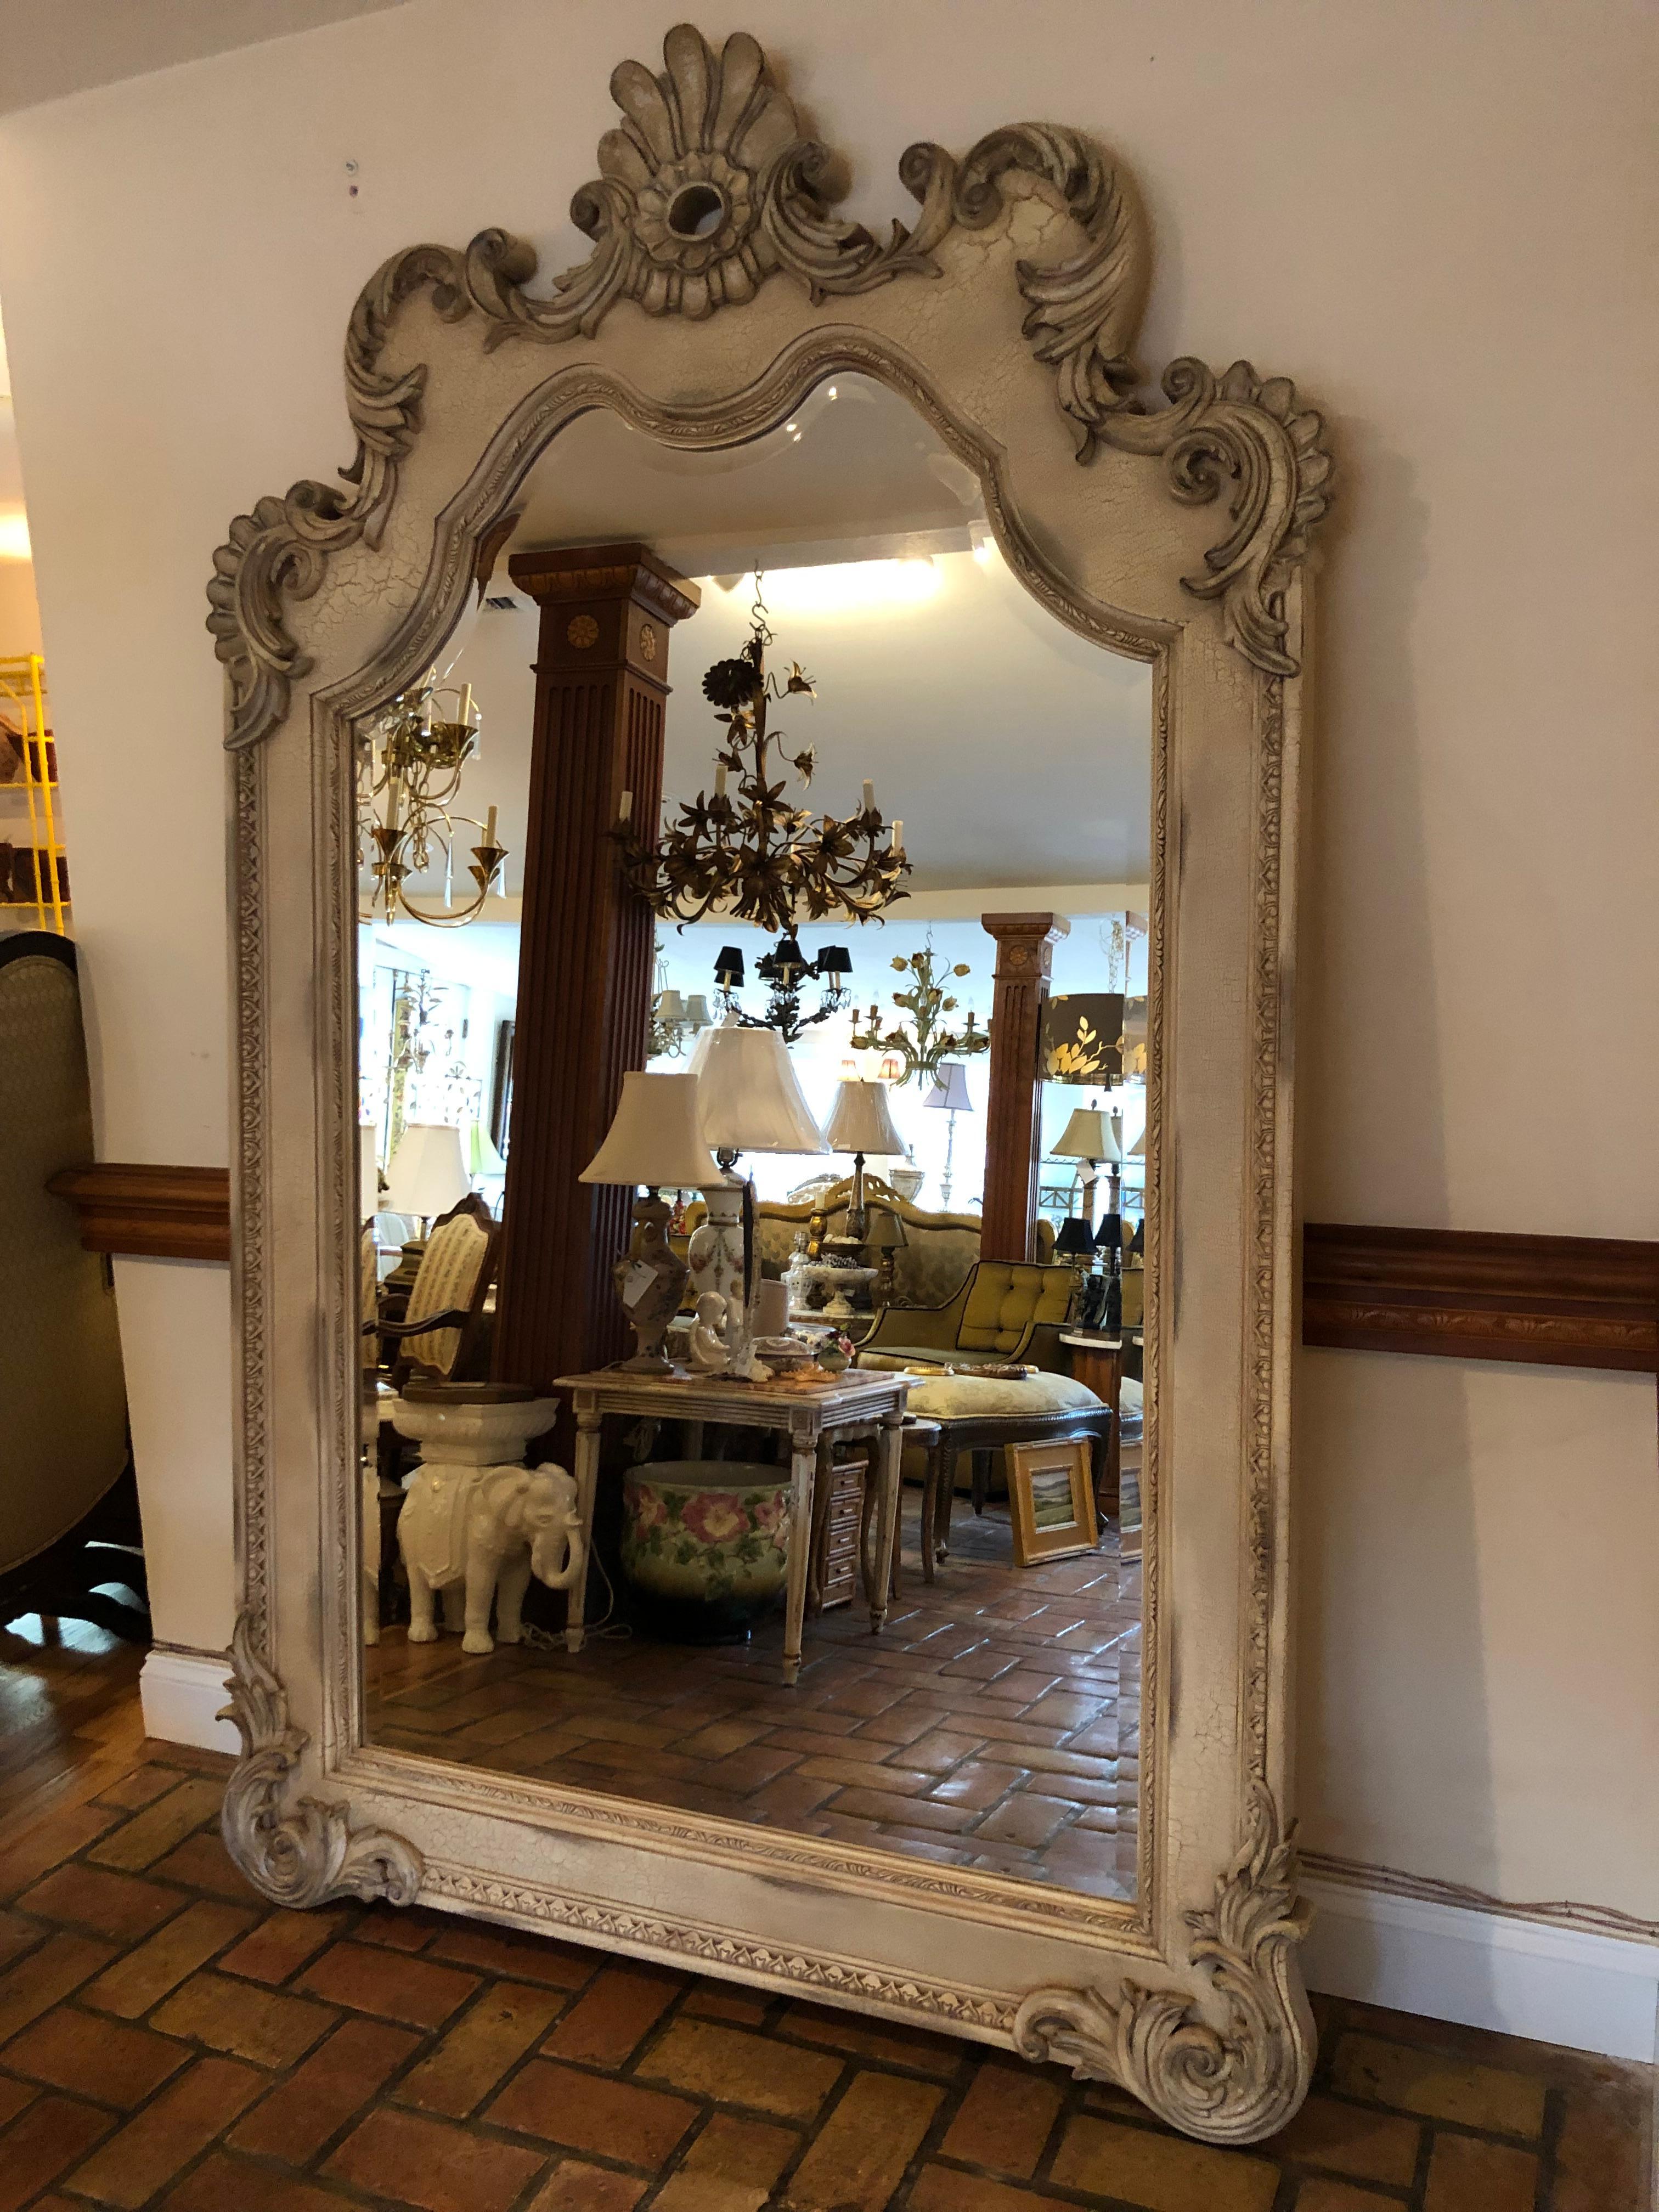 8 ft. Tall Hollywood Regency Style Leaning or Wall Mount Mirror 13